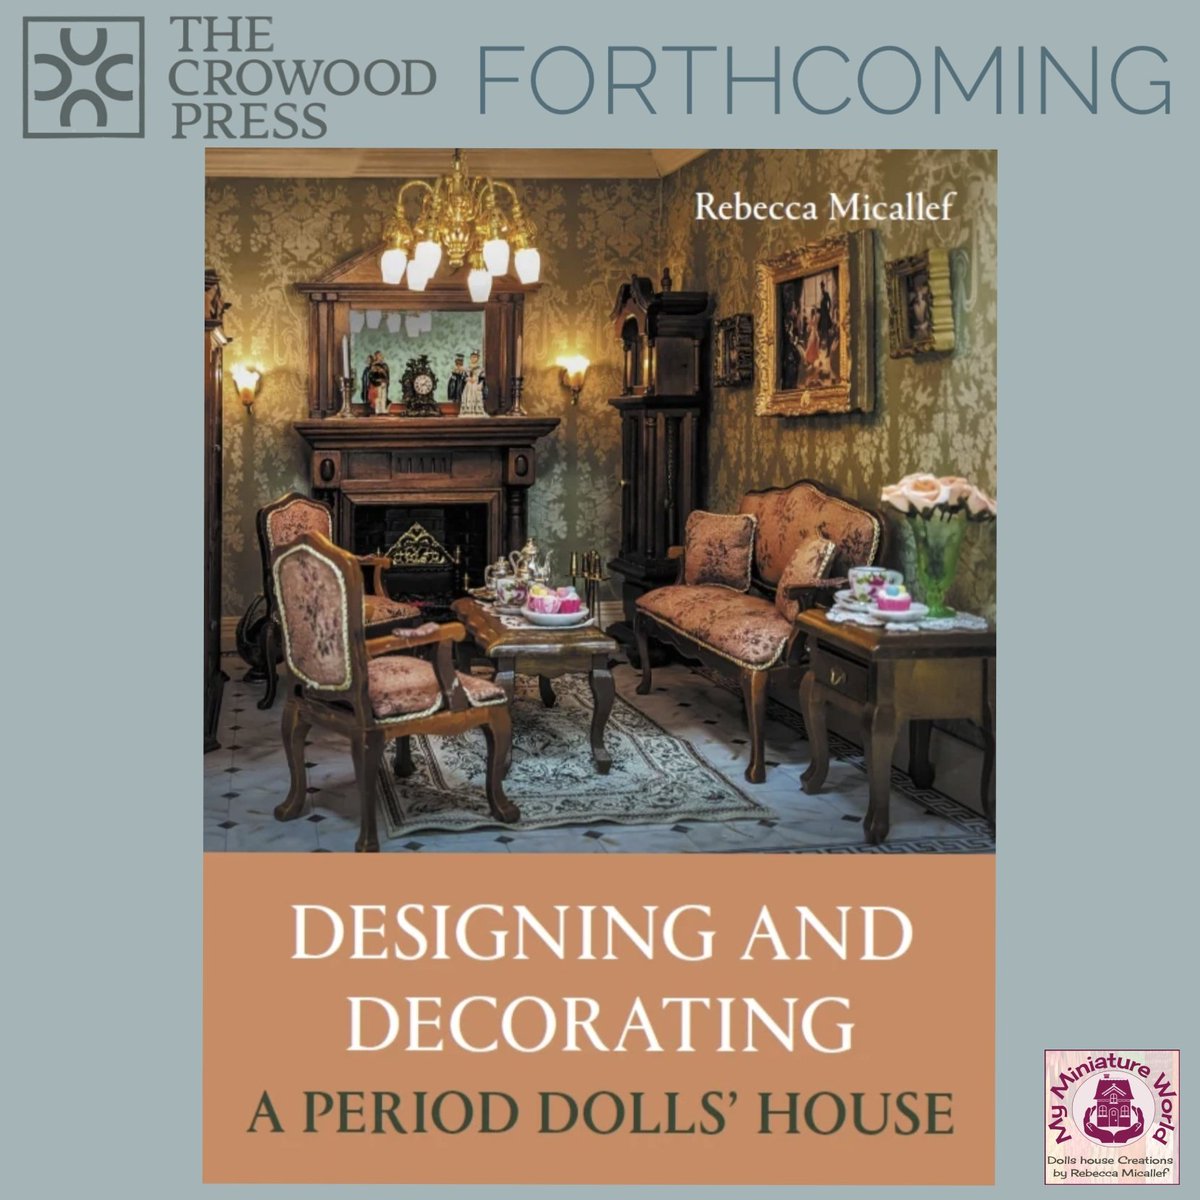 Now you can find the information about my forthcoming book 'Designing and Decorating a Period Dolls' House' on the Crowood Press website.
 LINK crowood.com/collections/fo…

#dollshouse #miniatures #crowoodpress #publishing #author #book #fothcoming #comingsoon #picoftheday #publisher